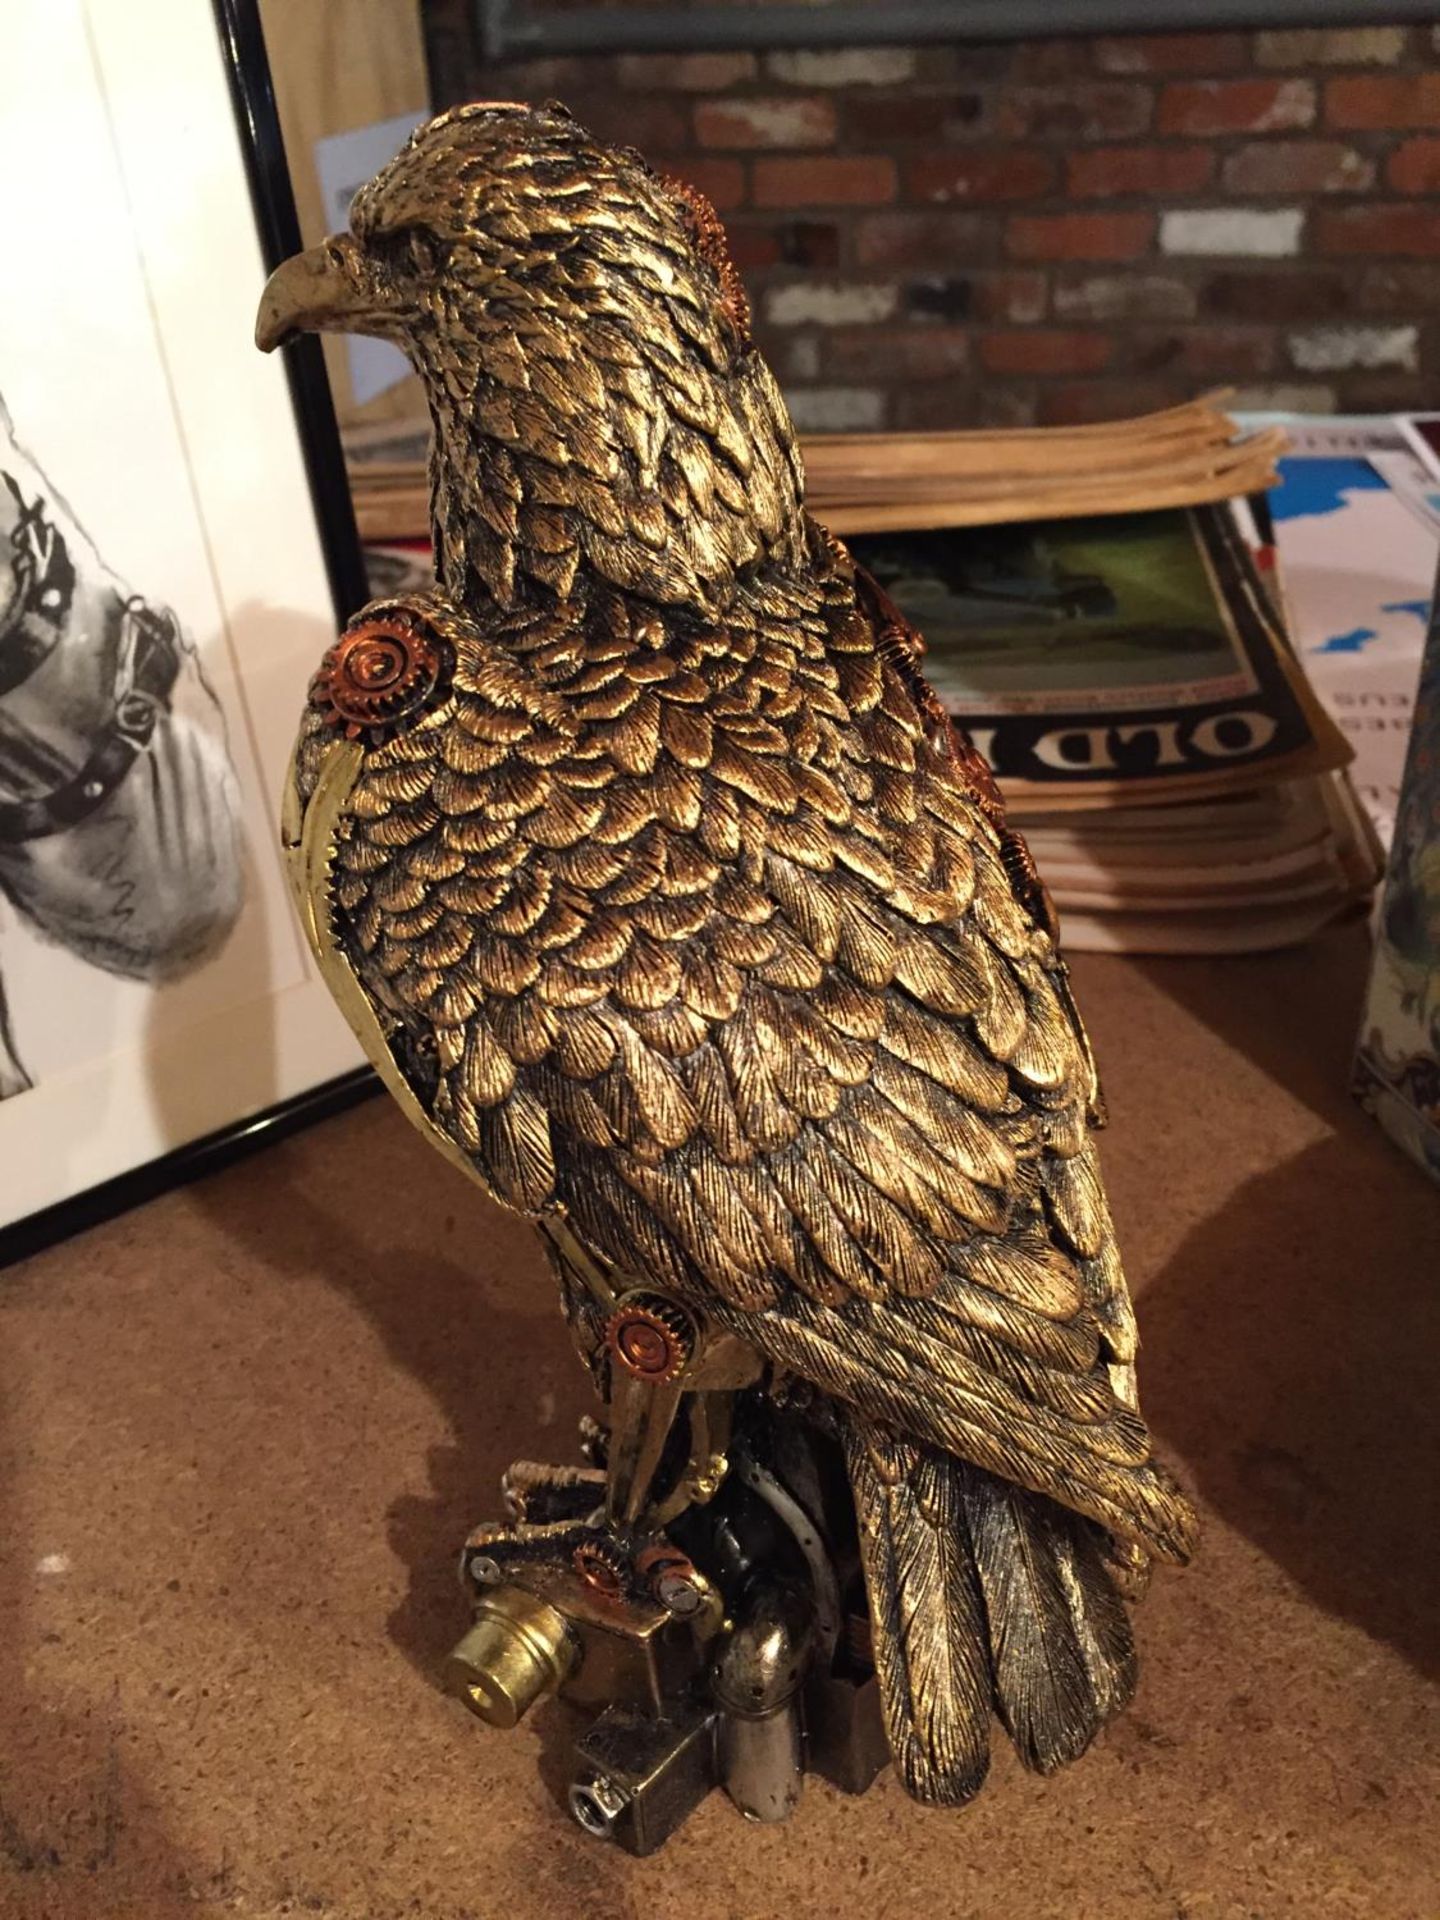 A STEAM PUNK STYLE EAGLE - Image 3 of 3